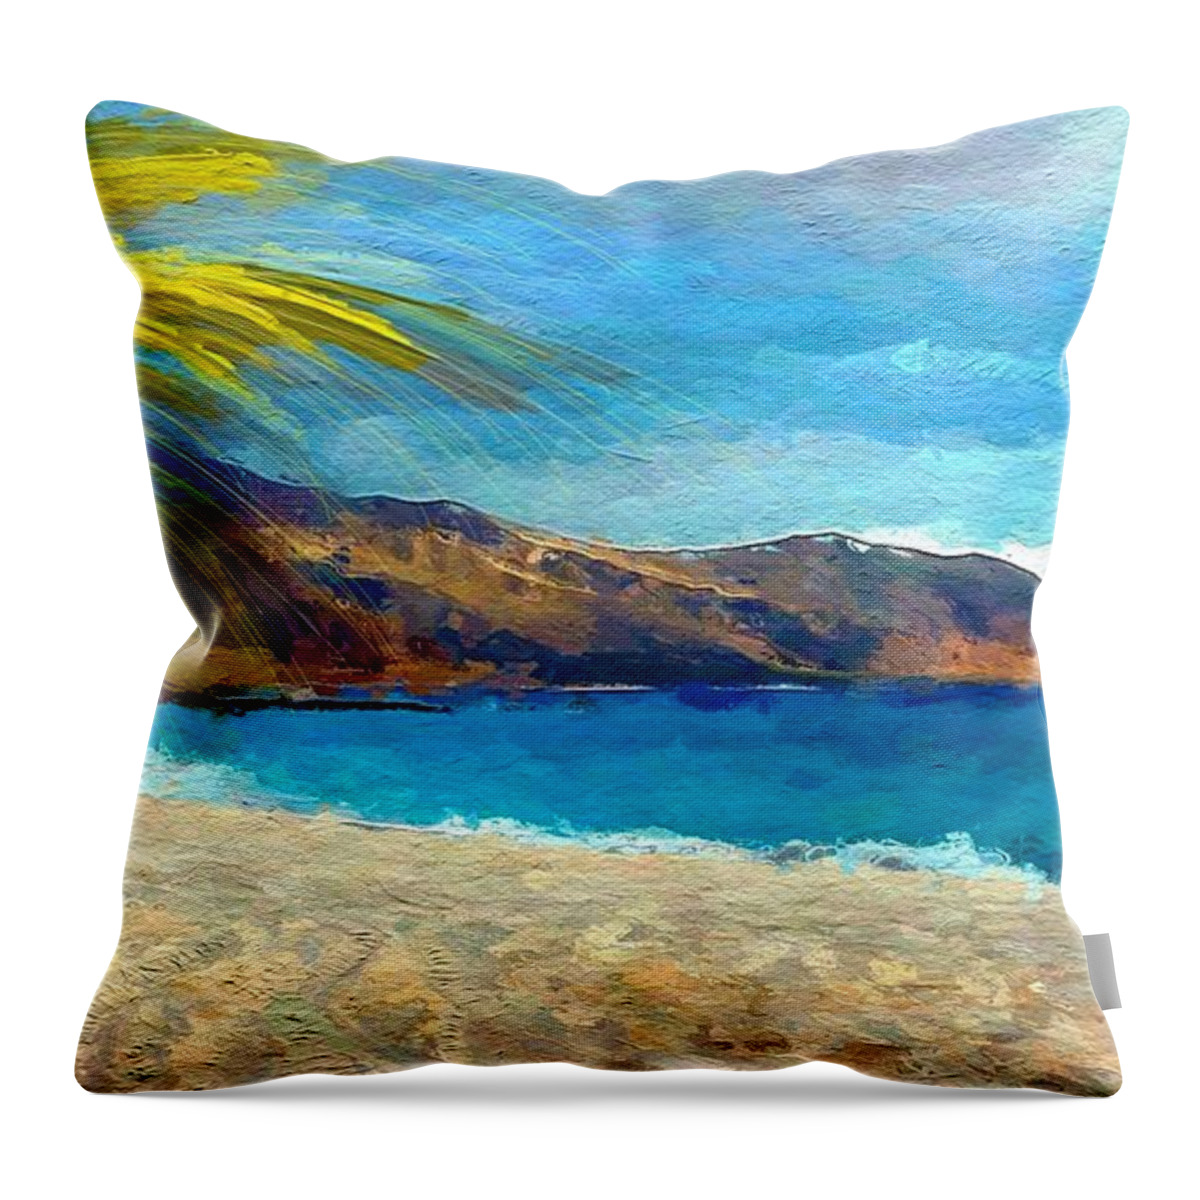 Anthony Fishburne Throw Pillow featuring the digital art Beach View by Anthony Fishburne